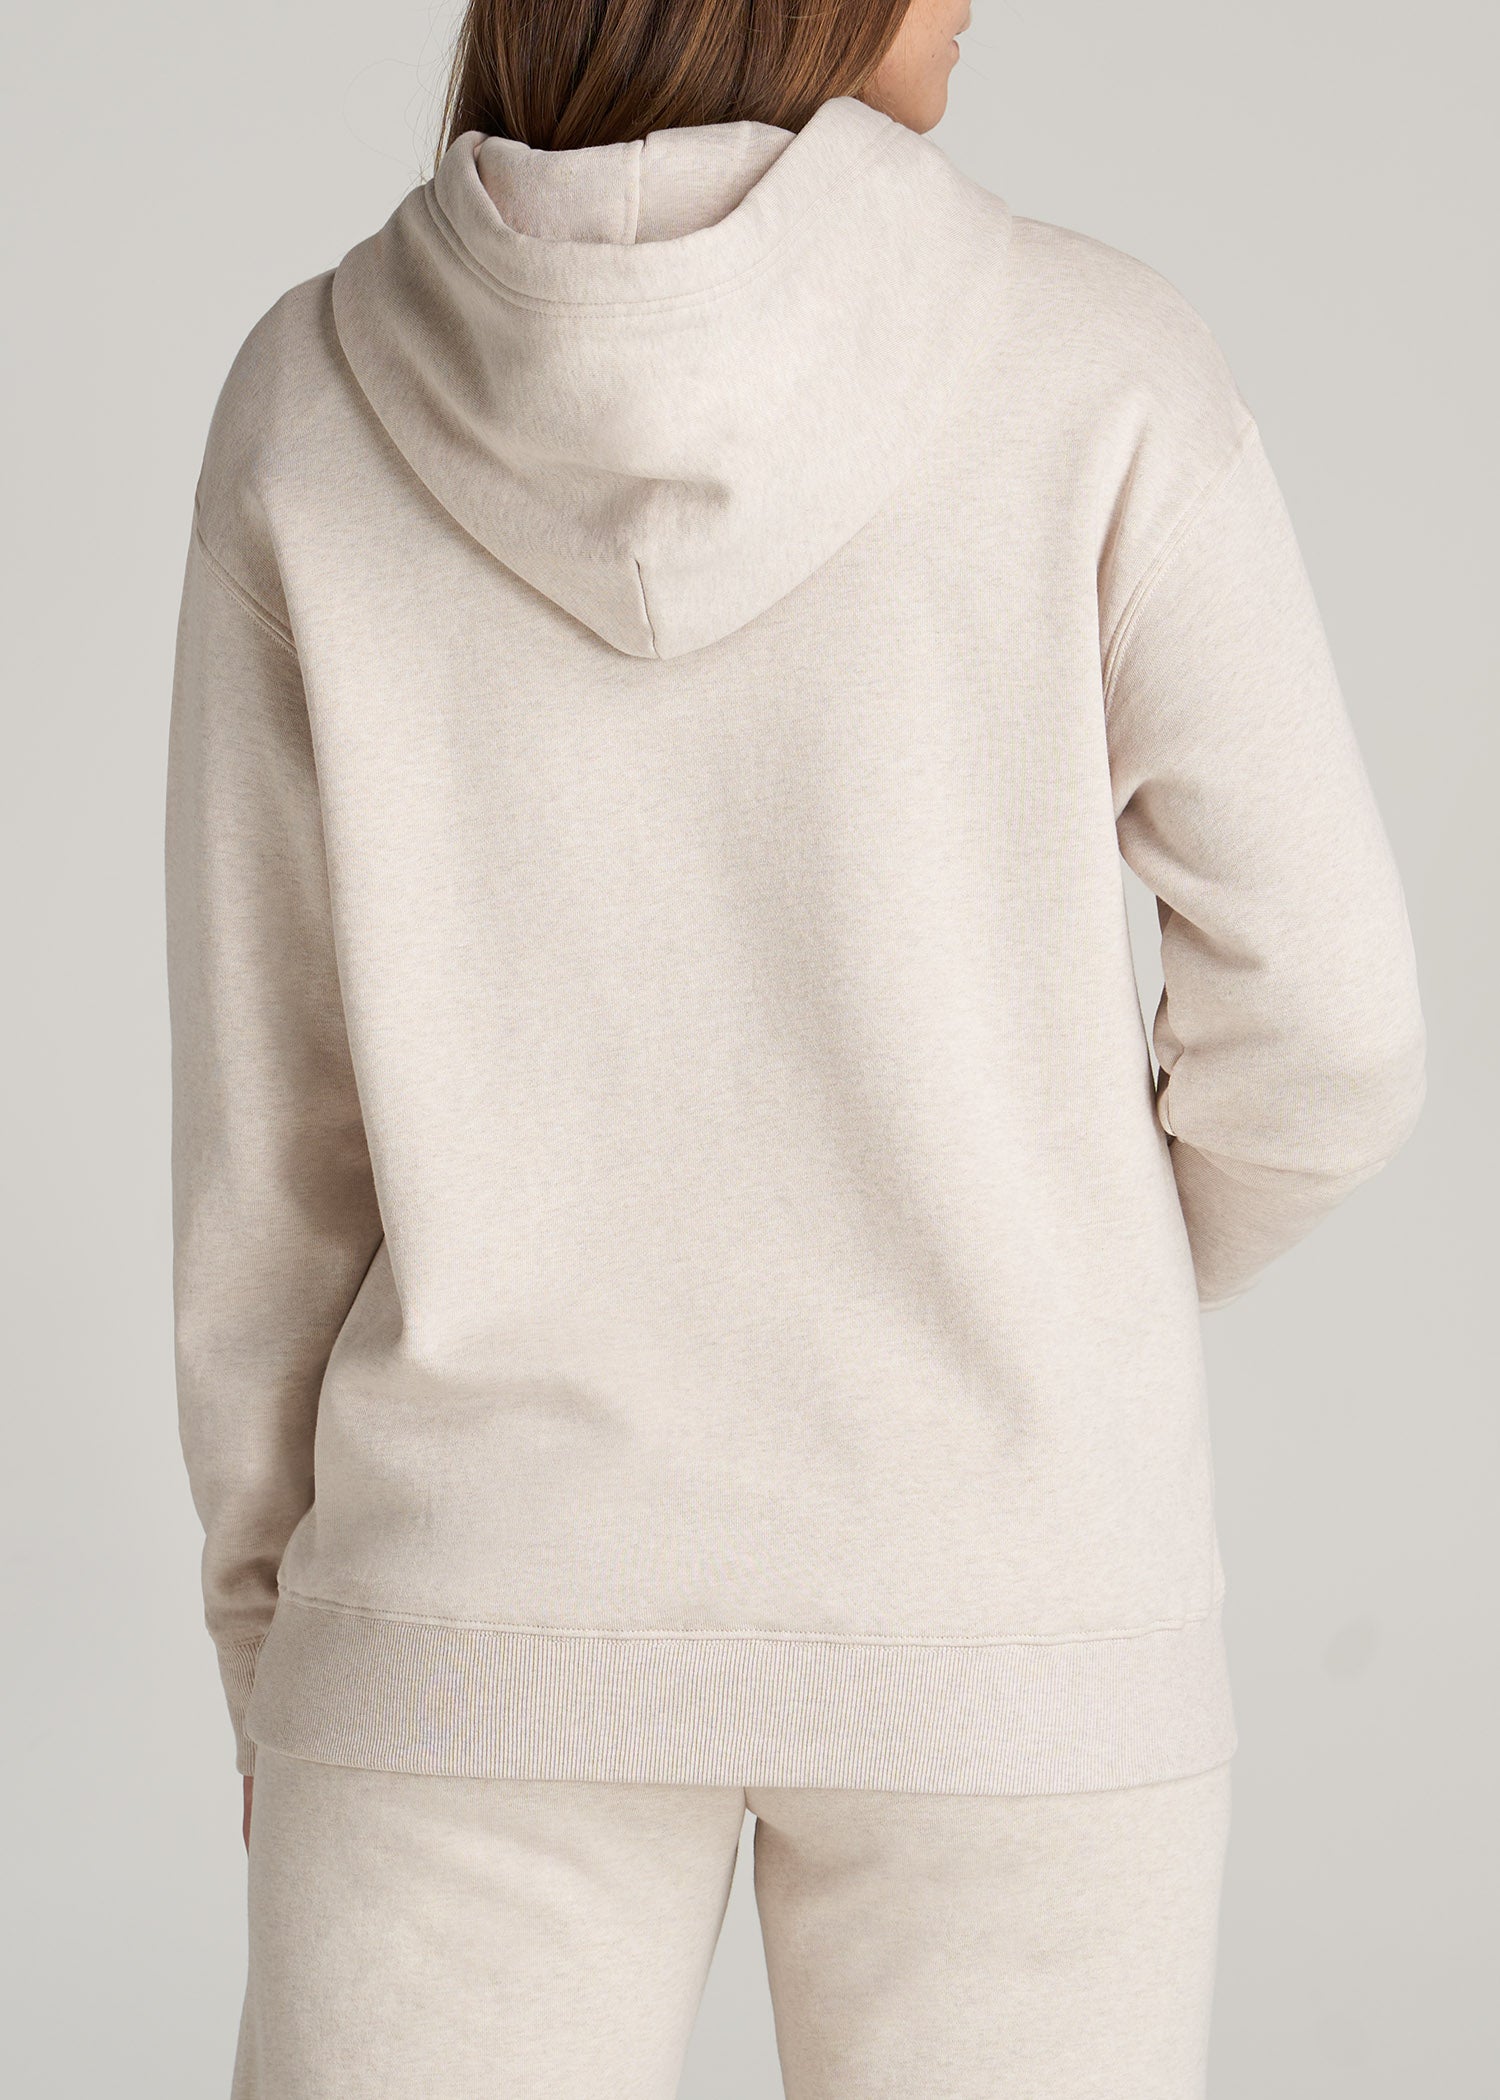 Women's Tall Wearever Pullover Hoodie Oatmeal Mix